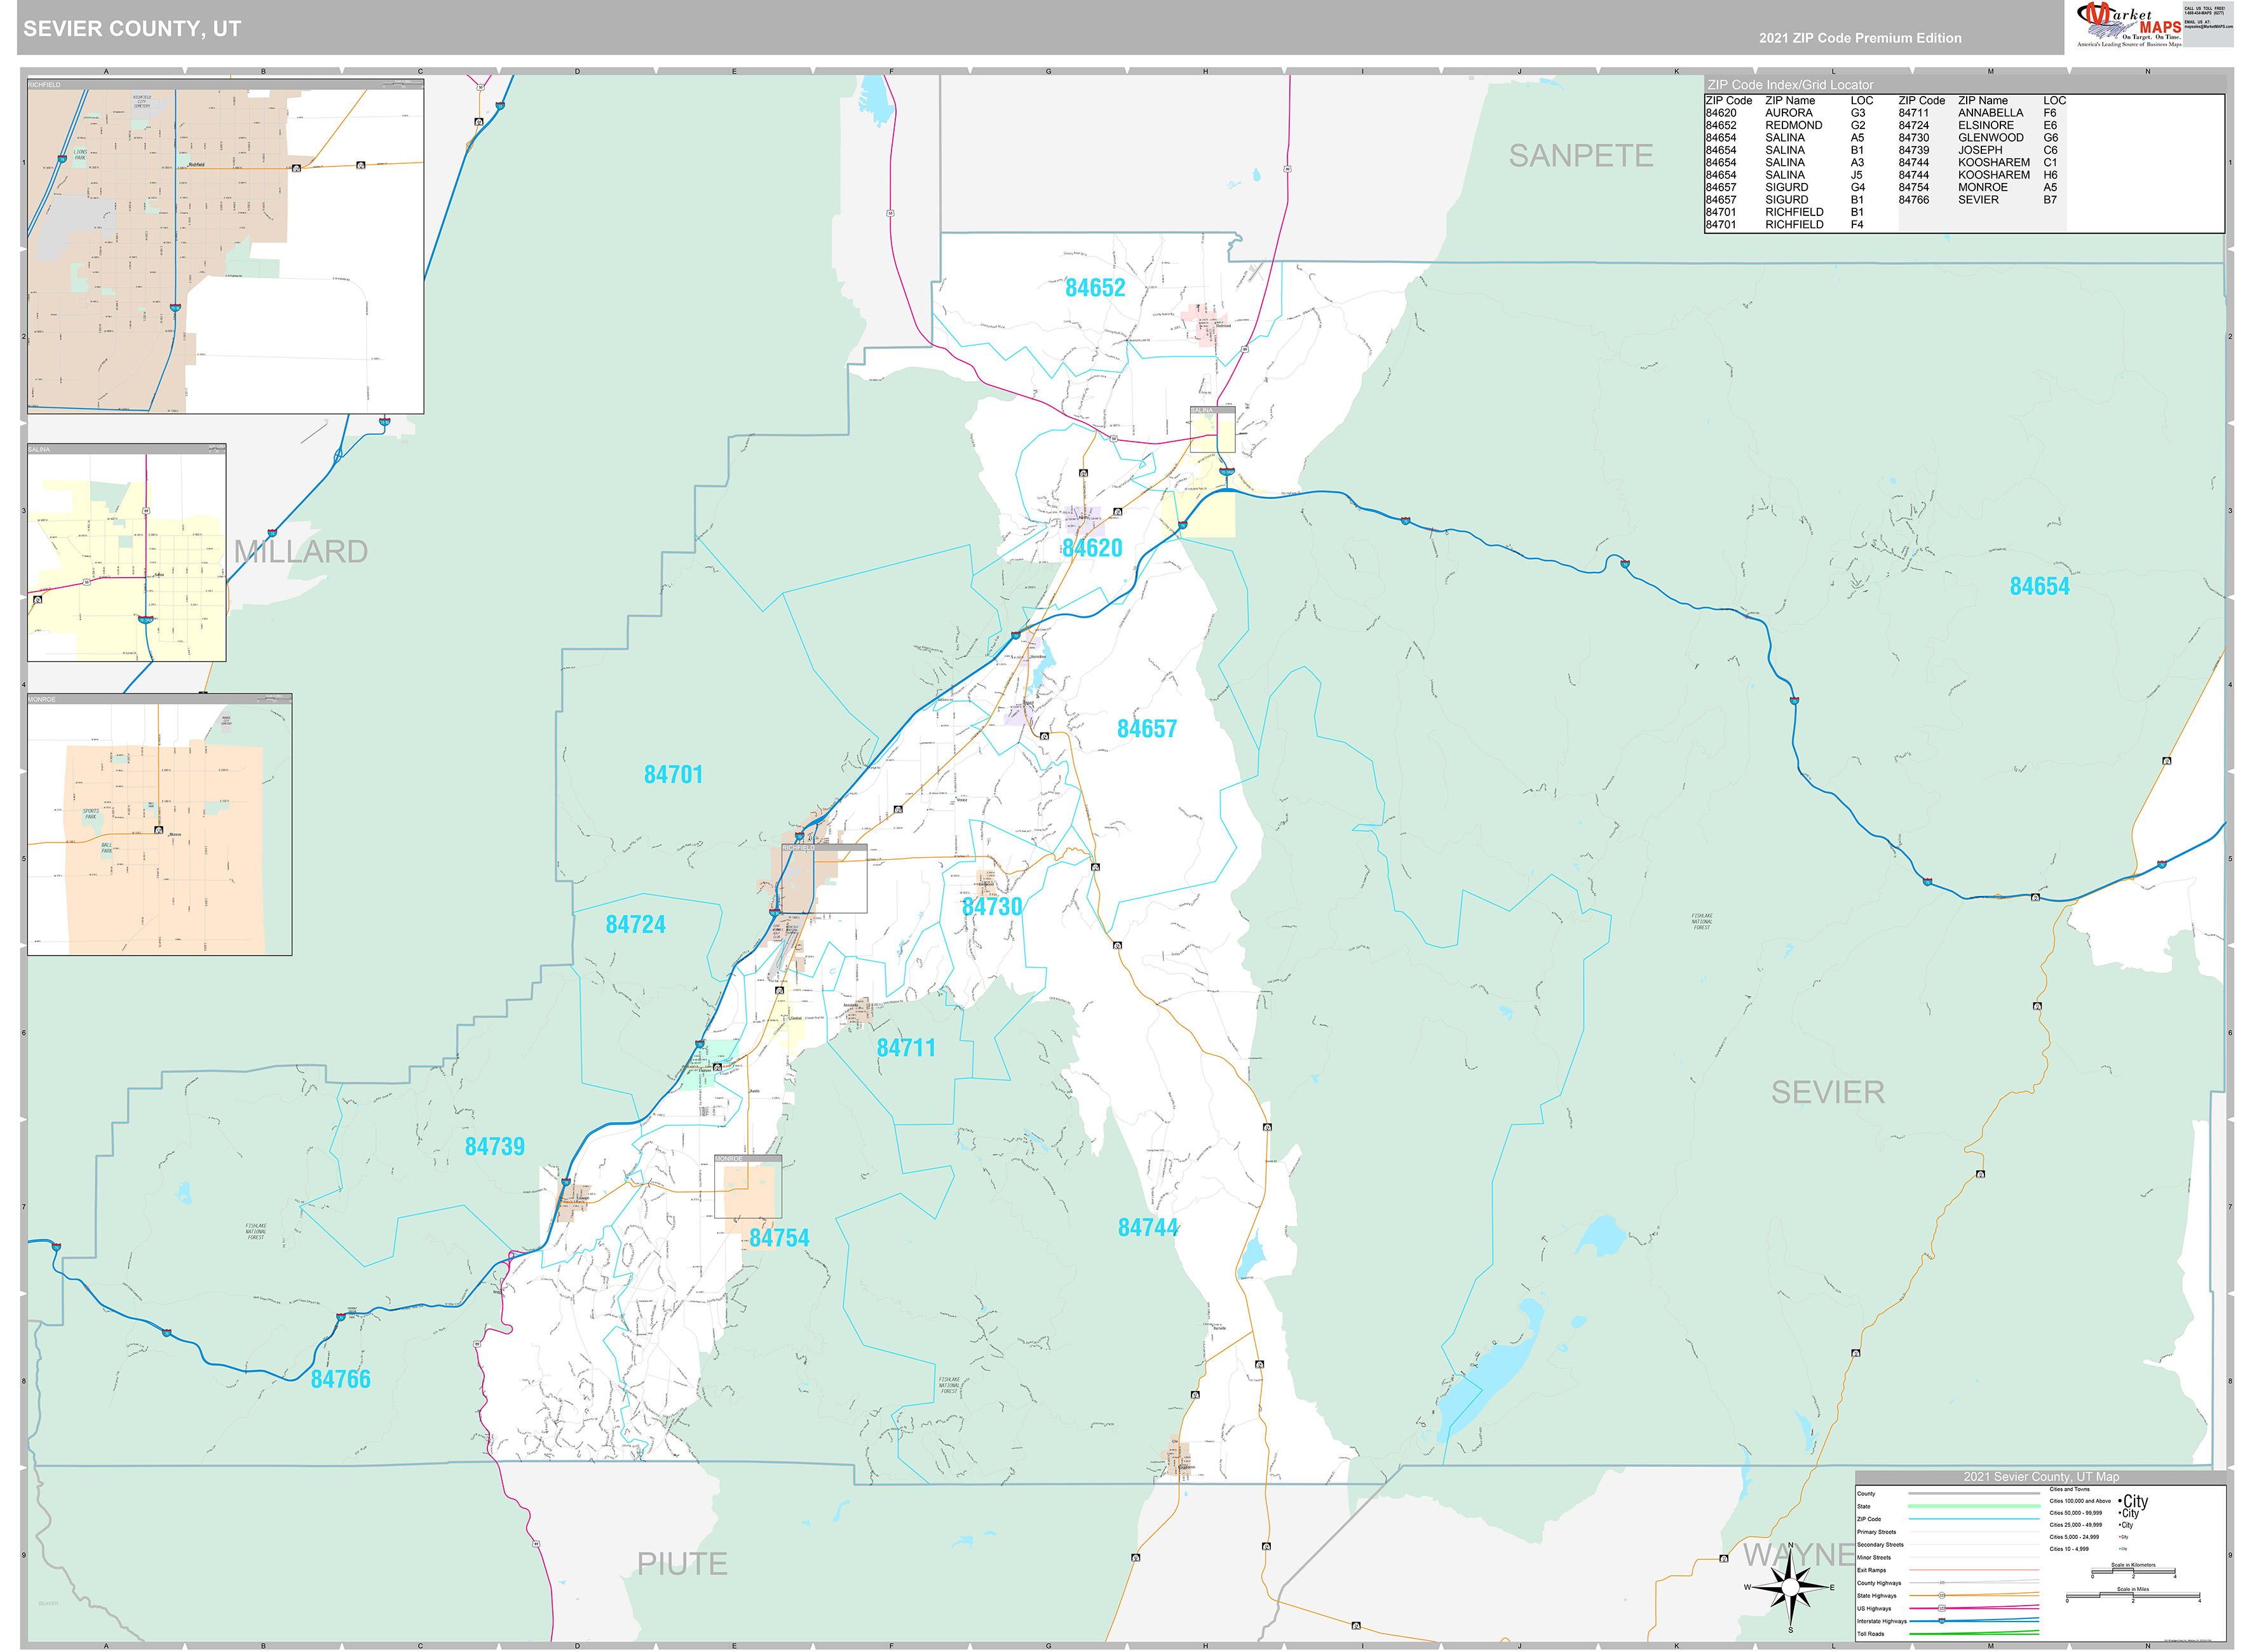 Sevier County, UT Wall Map Premium Style by MarketMAPS